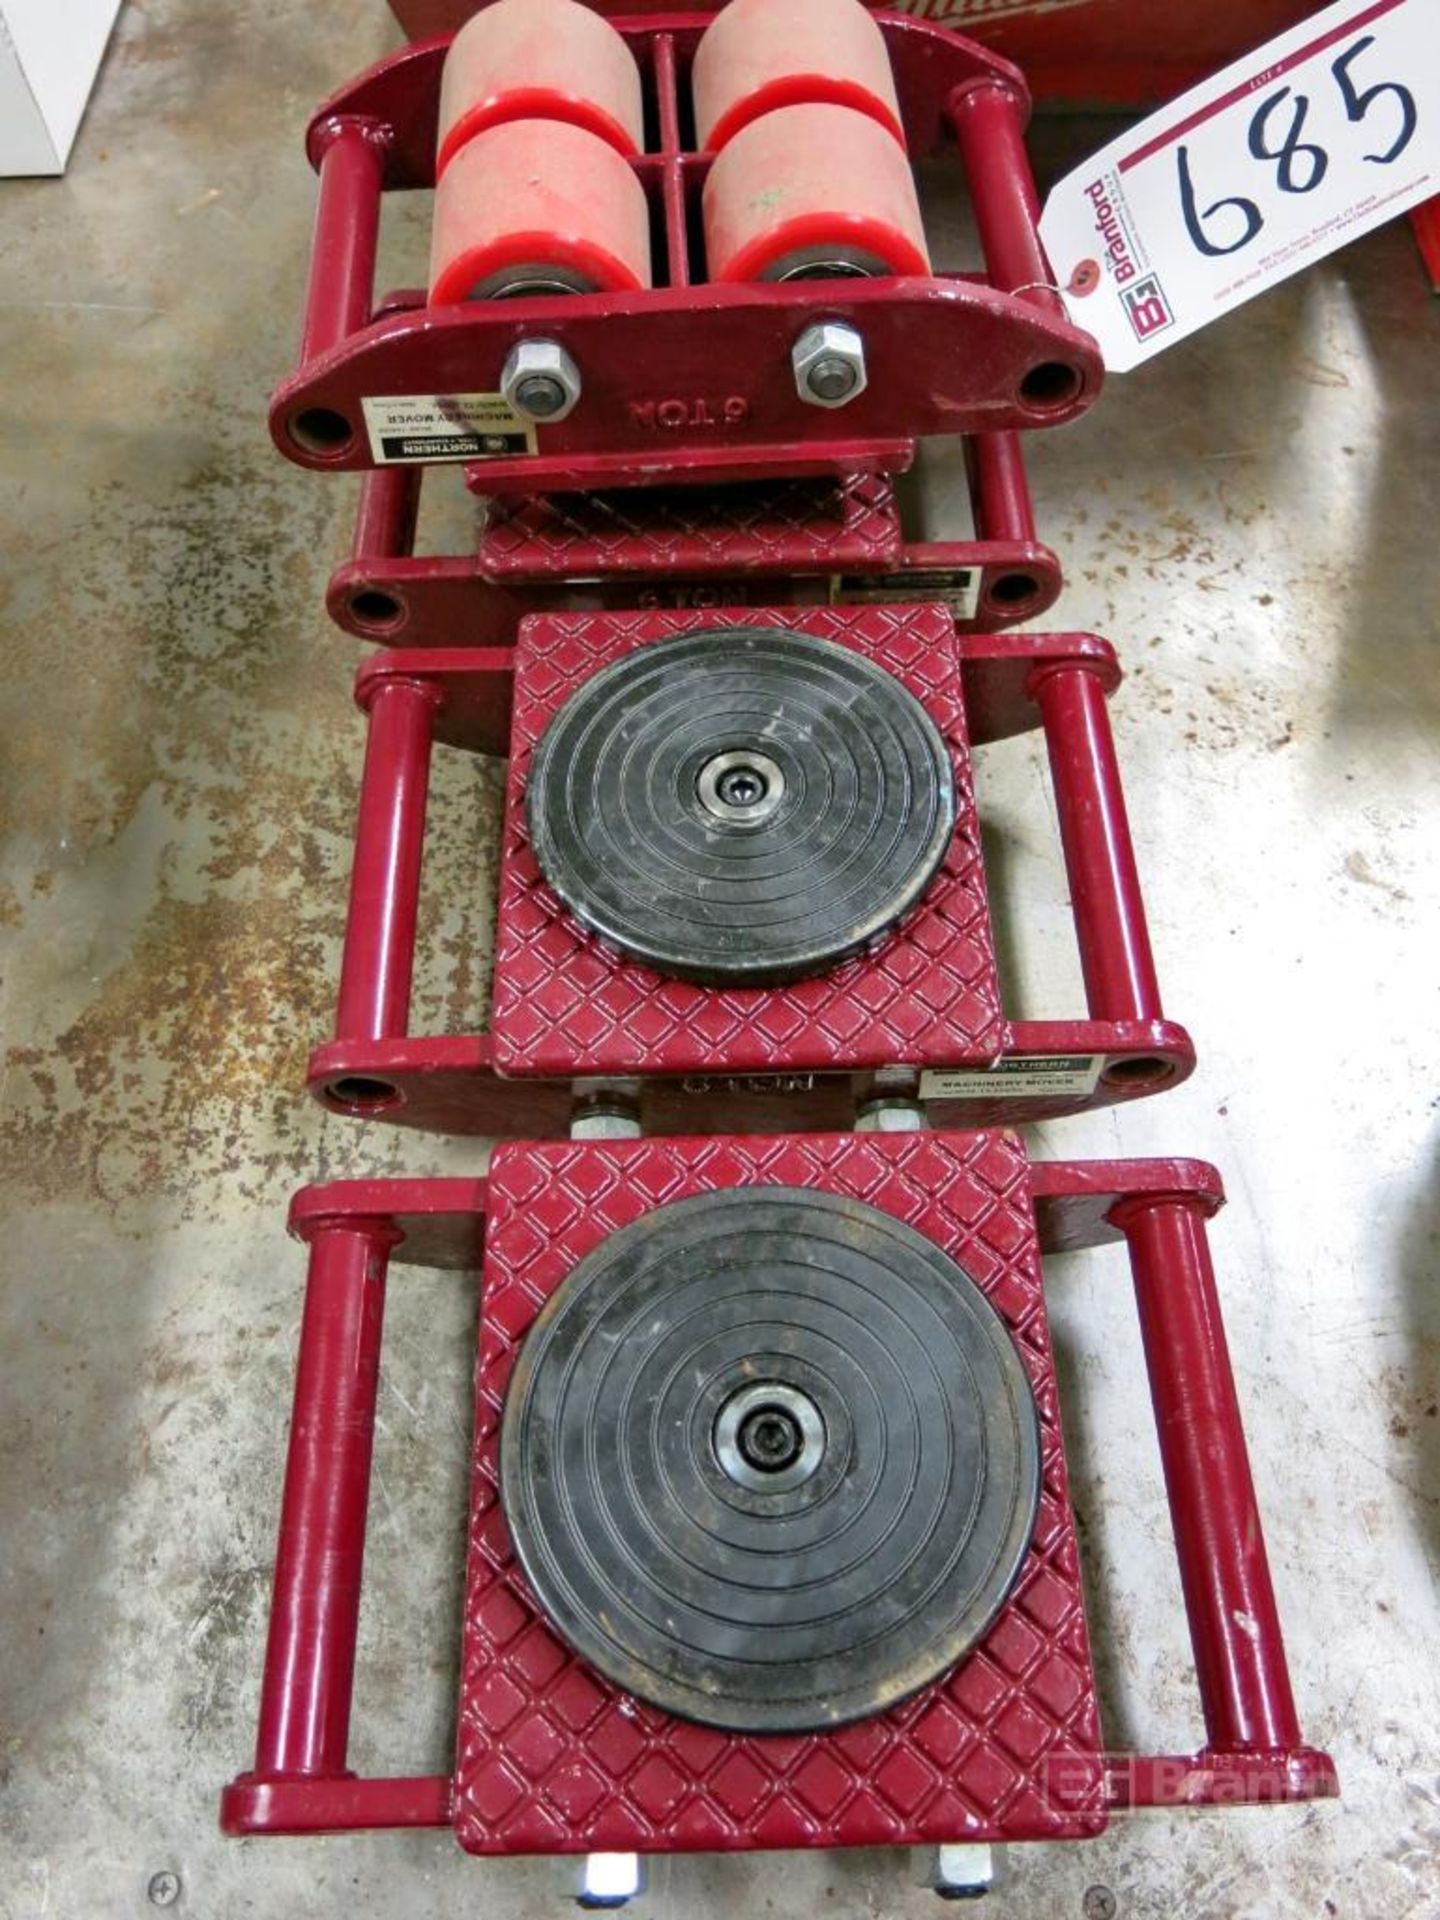 (4) Northern Tool Equipment Model 144009 6-Ton Cap. Machinery Moving Dolleys